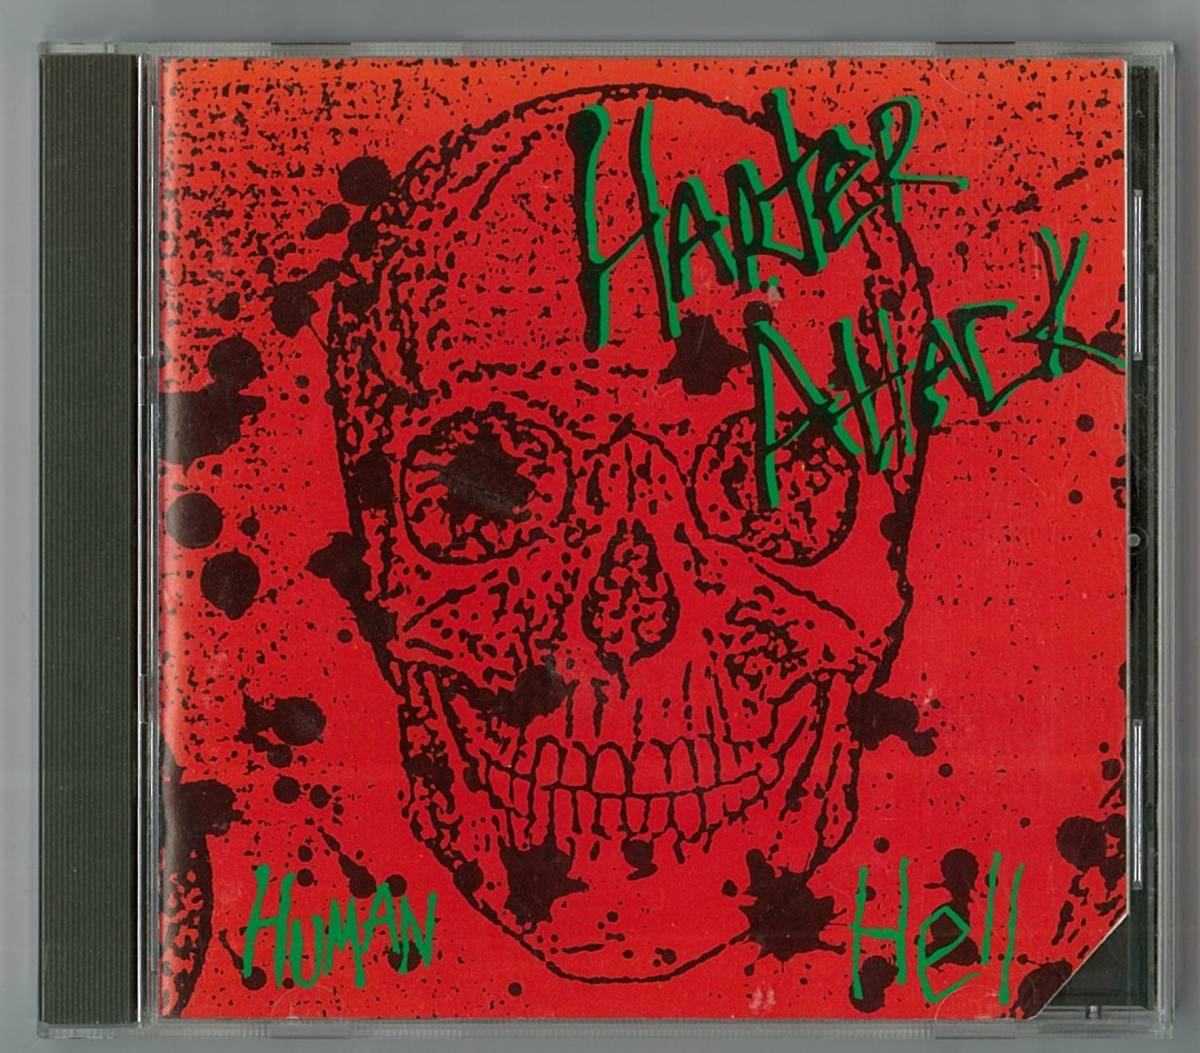 HARTER ATTACK ／ HUMAN HELL　輸入盤ＣＤ（カット）　検～ thrash nuclear assault anthrax S.O.D m.o.d_画像1